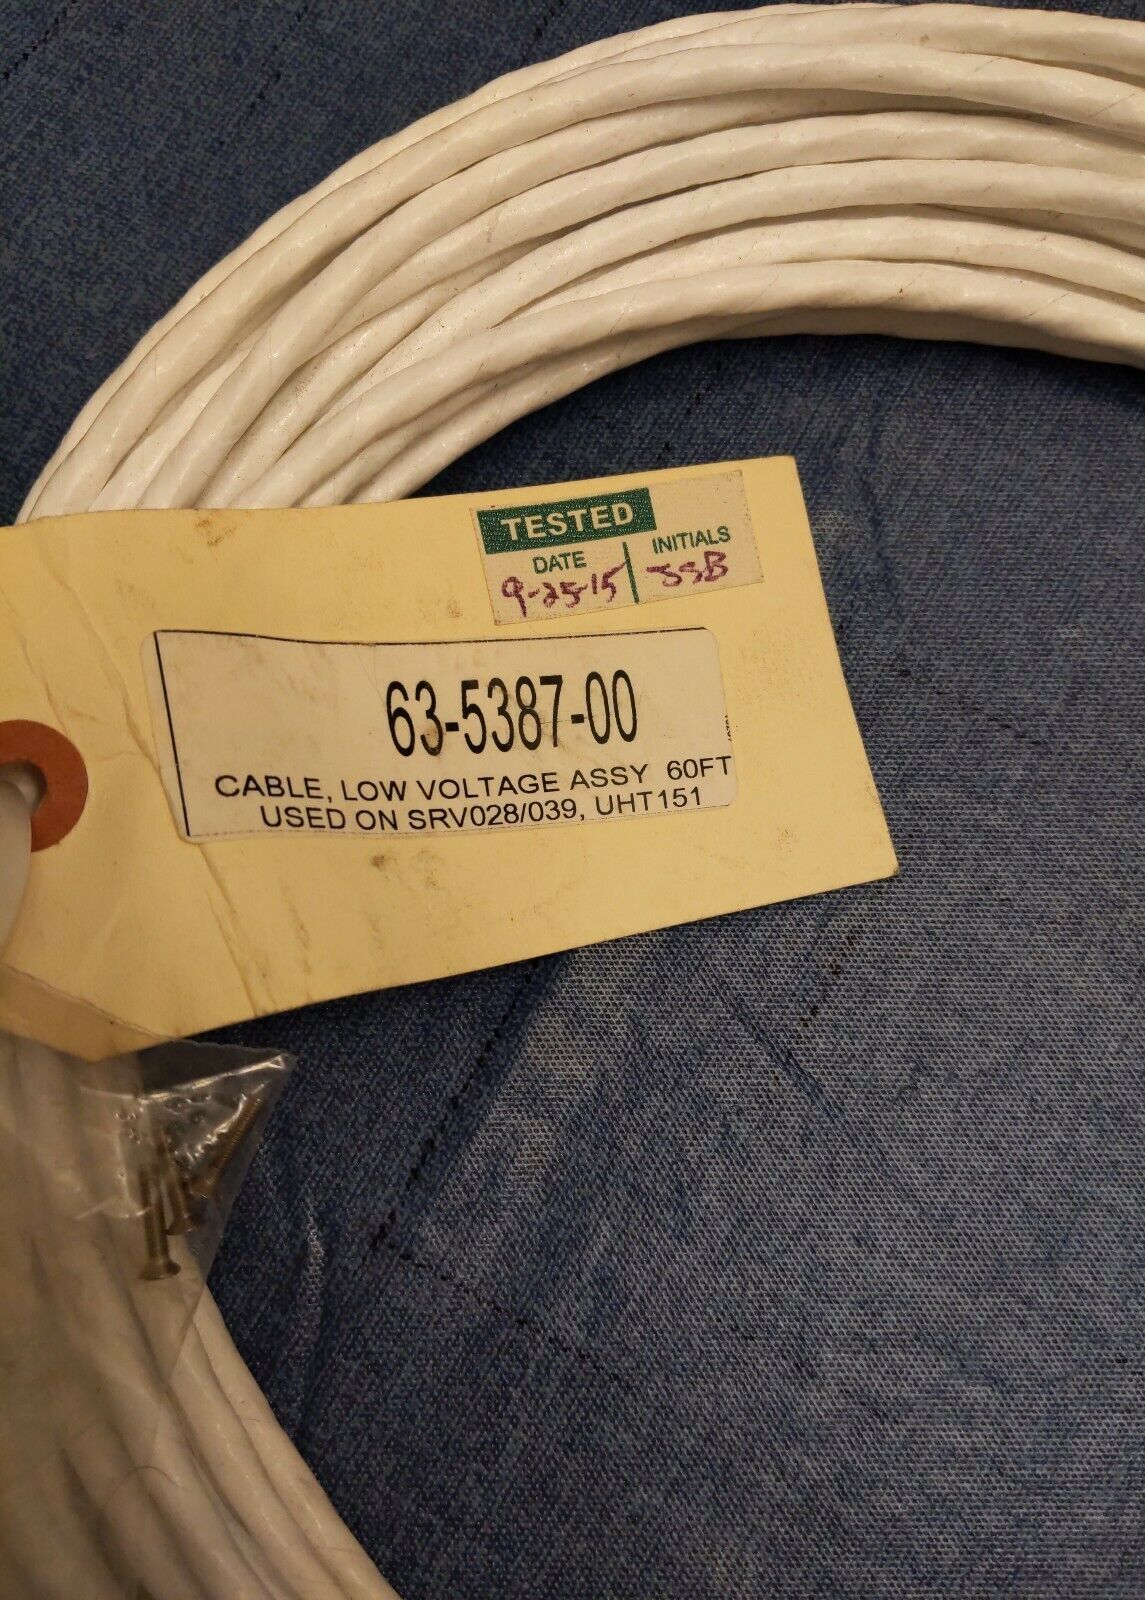 GRAPEK BATES 63-5387-00 LOW VOLTAGE CABLE ASSEMBLY USED ON SRV028/039 CBL102 - 0